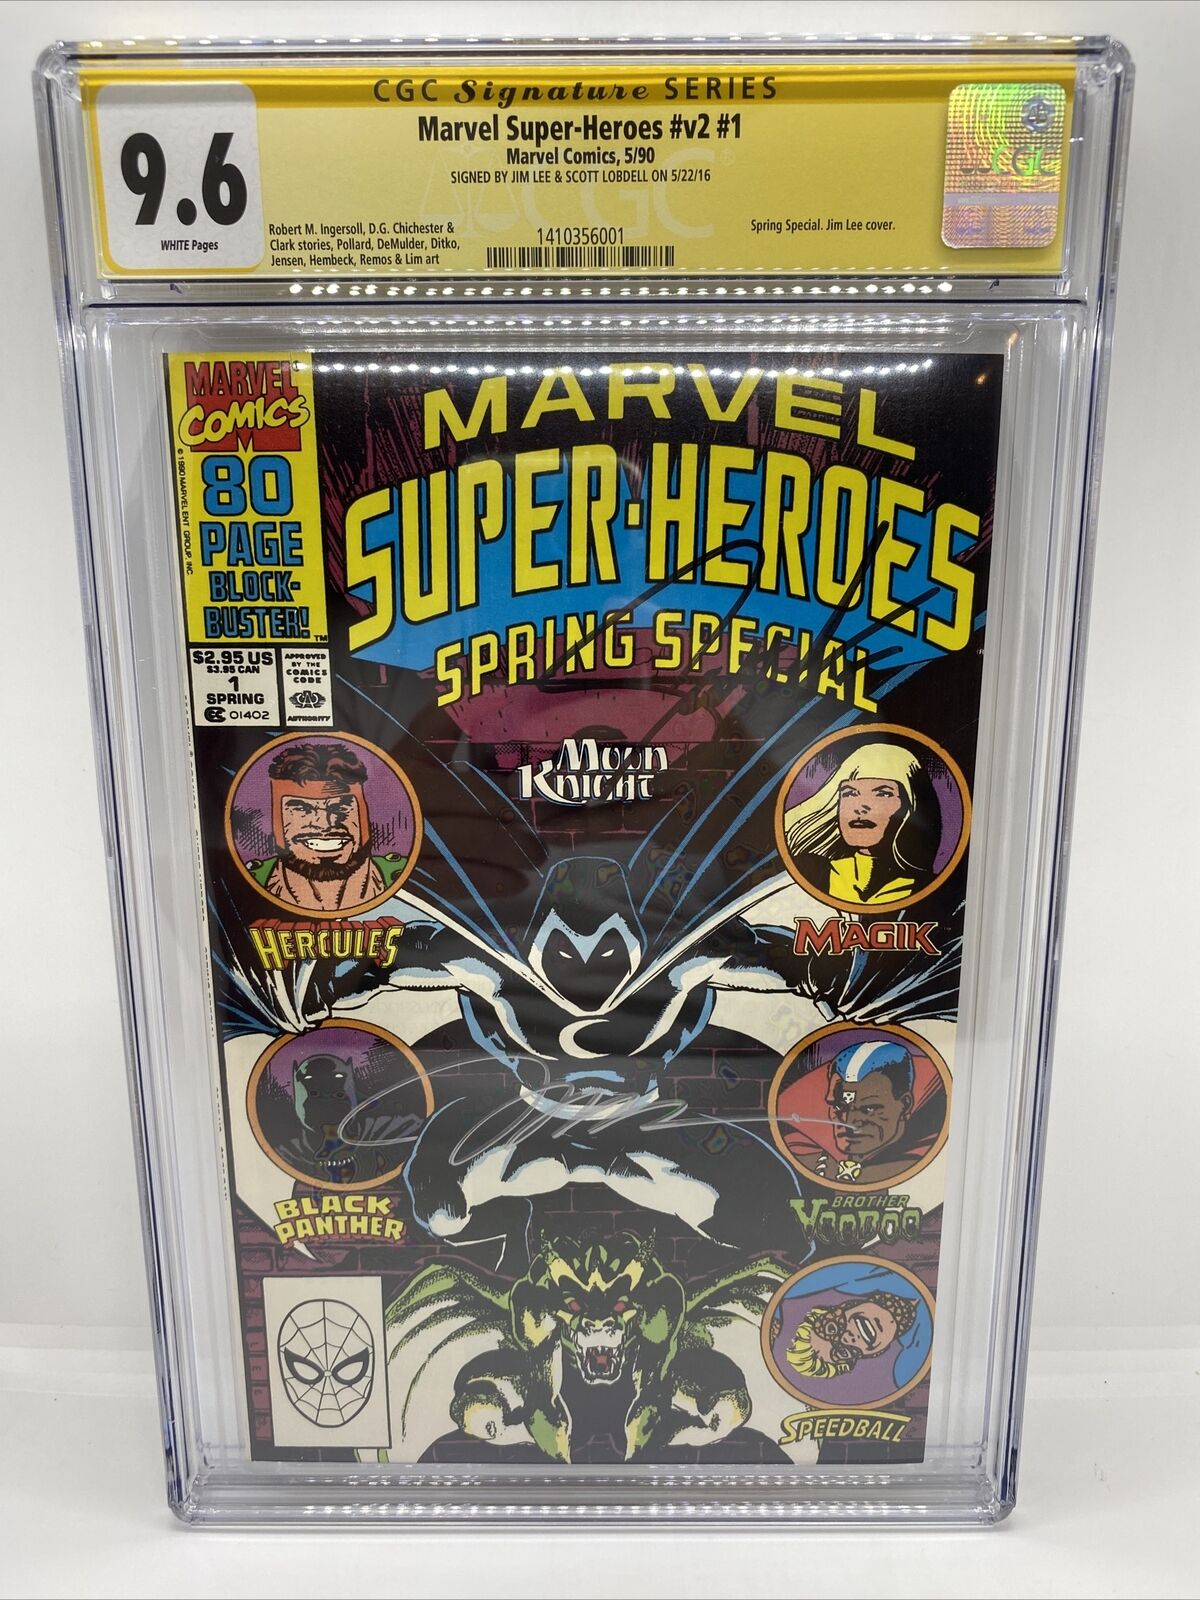 Marvel Super Heroes #1 Spring Special CGC SS 9.6 Jim Lee signed / Moon Knight